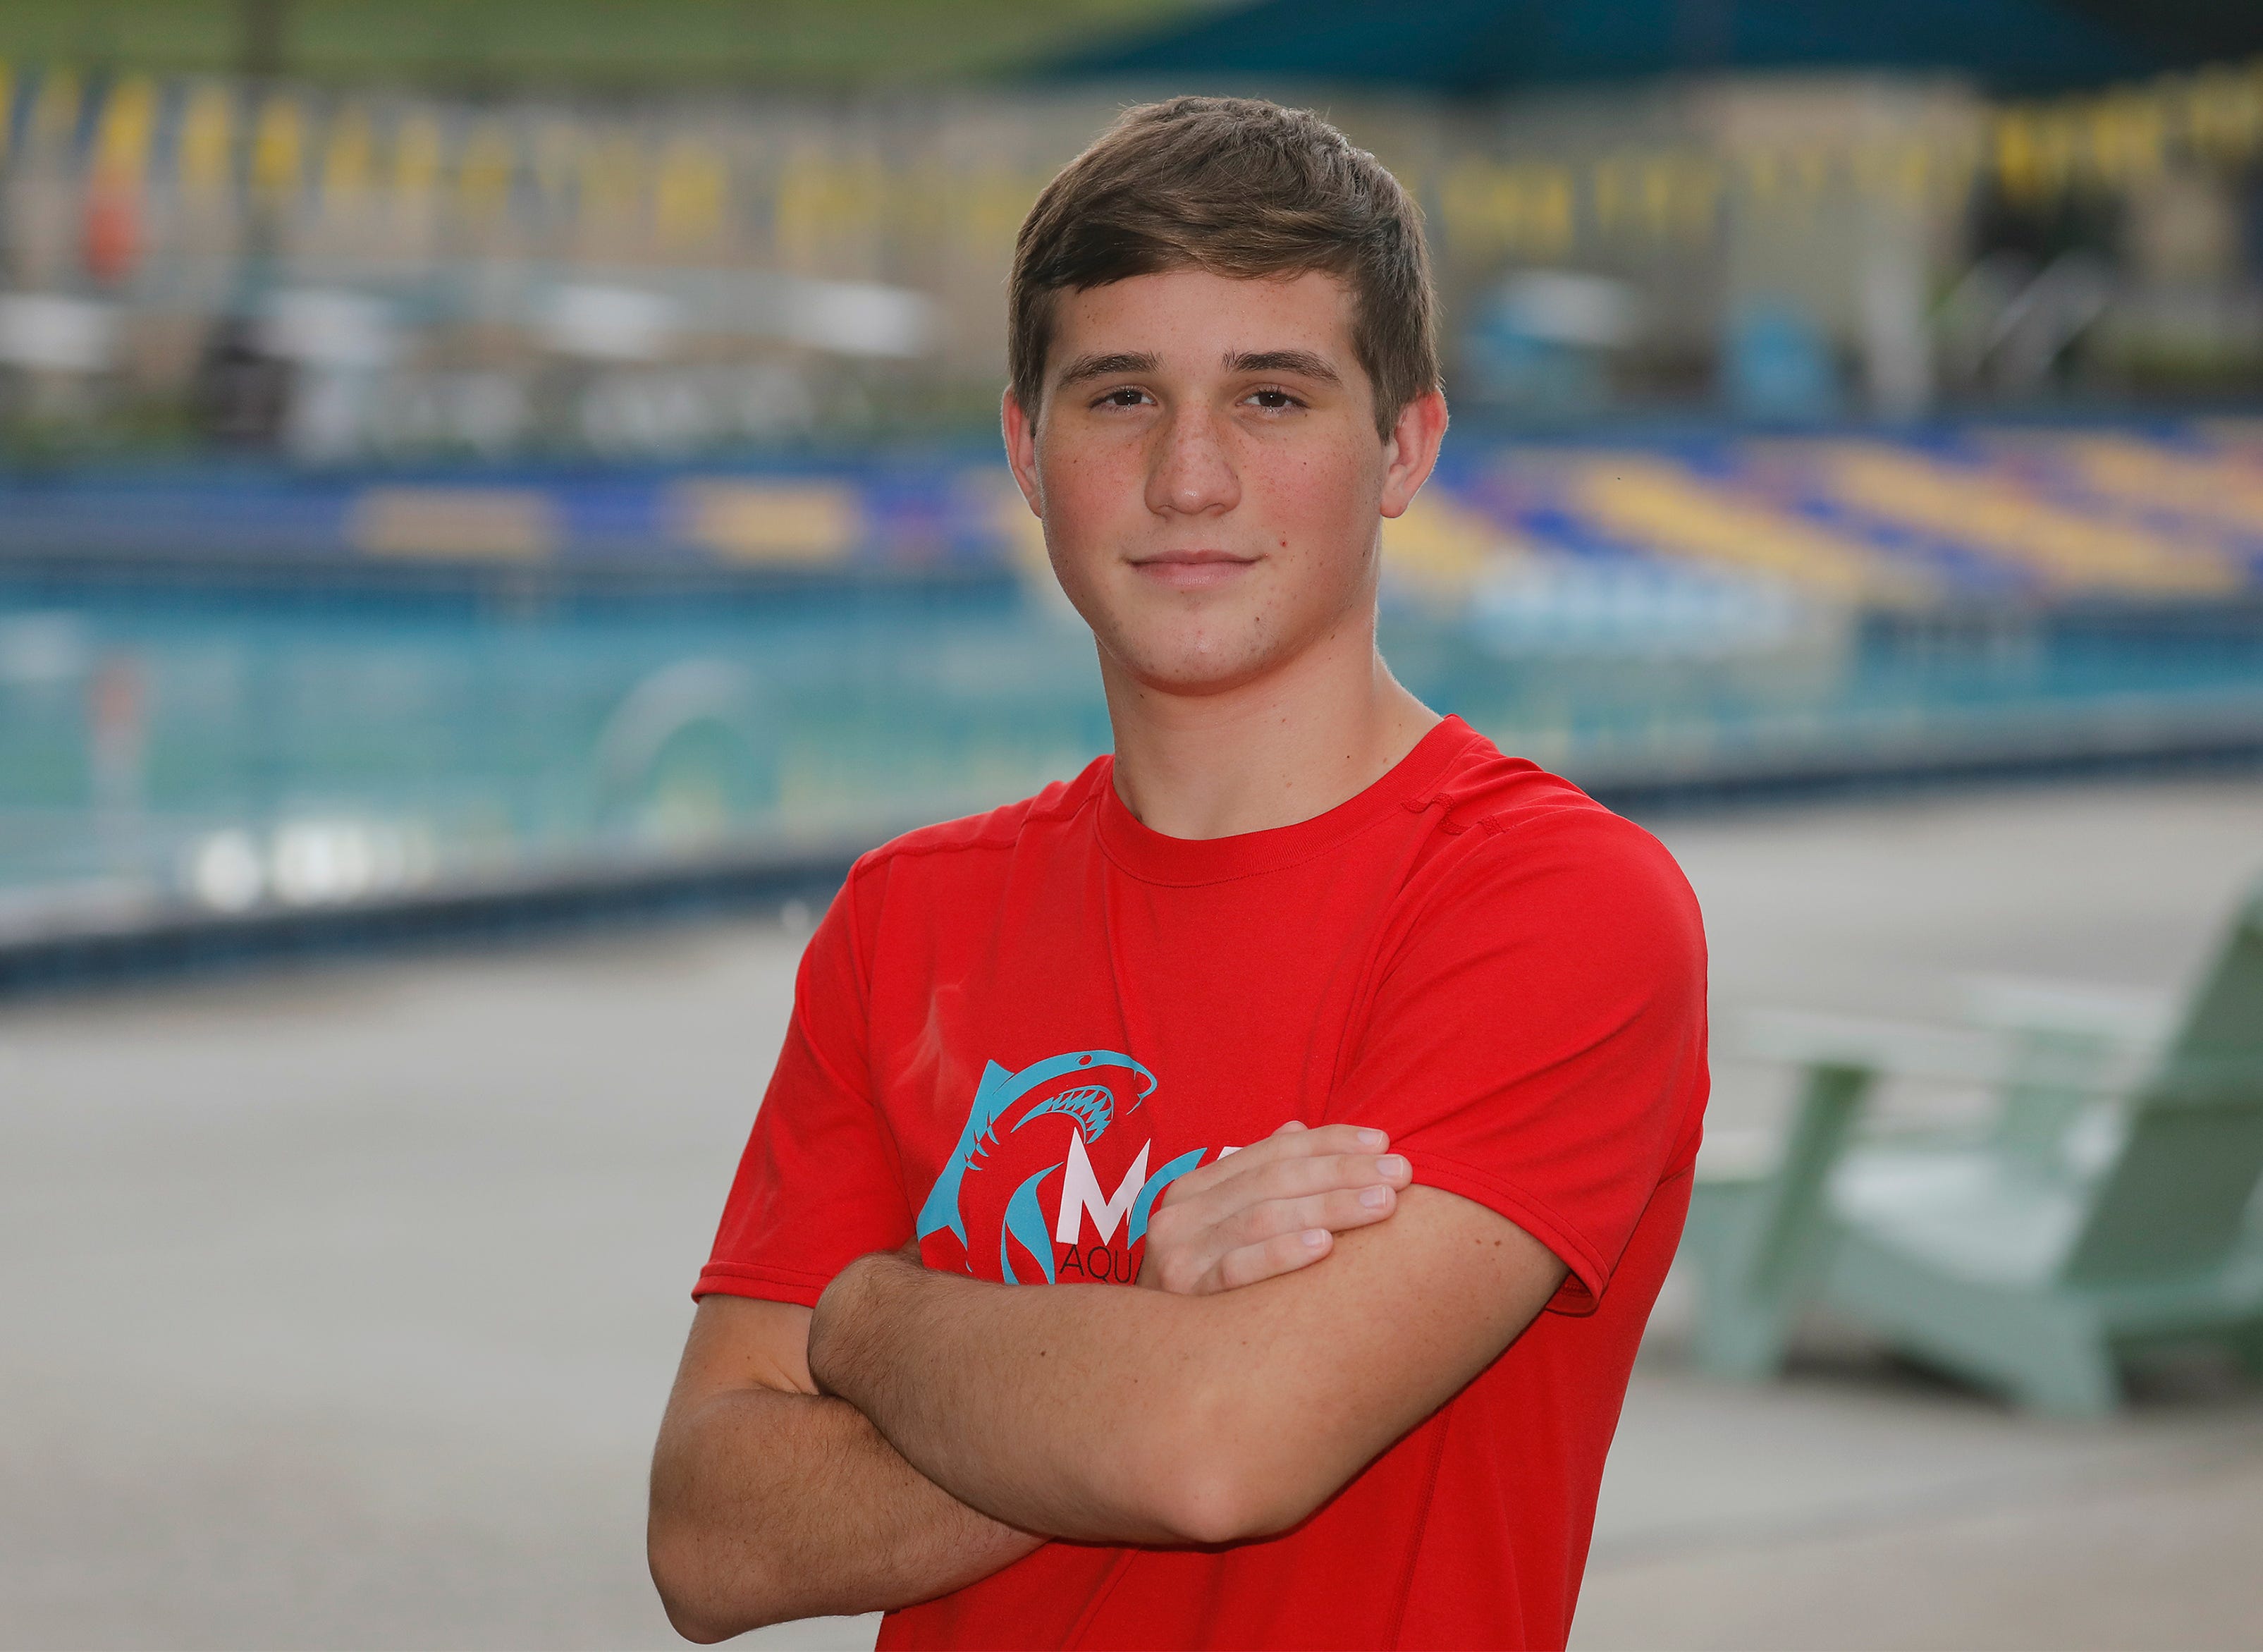 Brayden Dam, a breaststroke swimmer on the George Jenkins High team, and his family were displaced by Hurricane Dorian. PIERRE DUCHARME/THE LEDGER